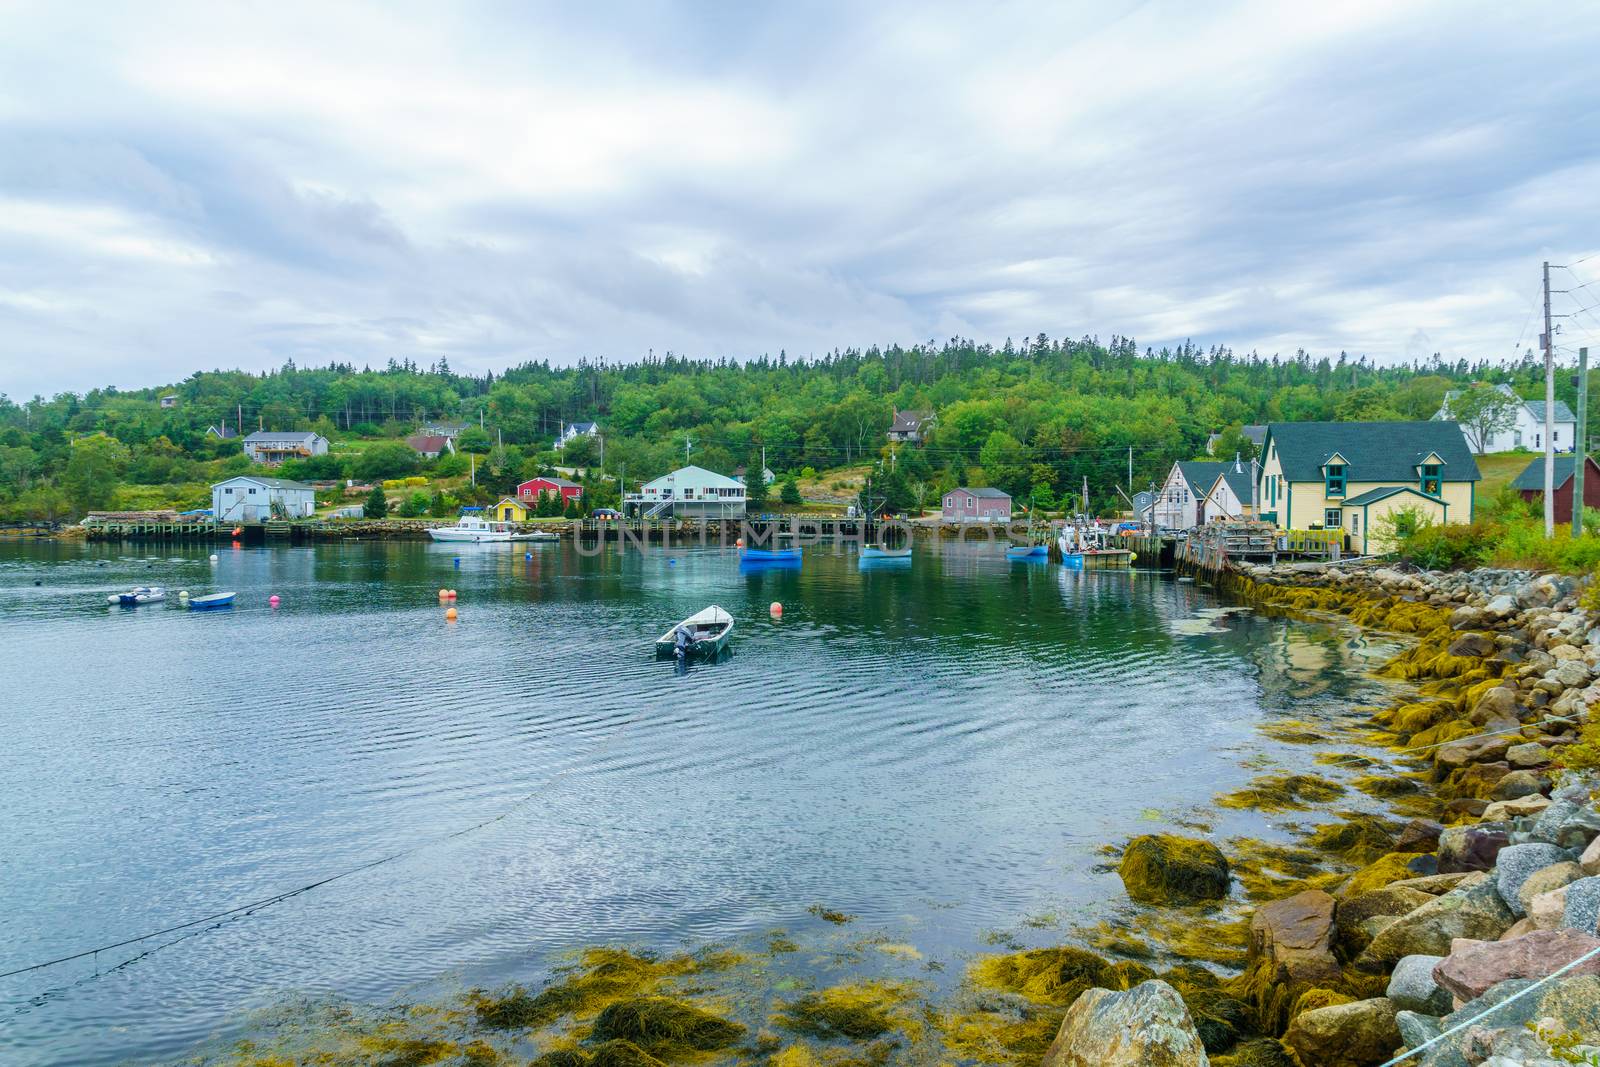 Views of the bay, boats and waterfront buildings in Northwest Cove, Nova Scotia, Canada